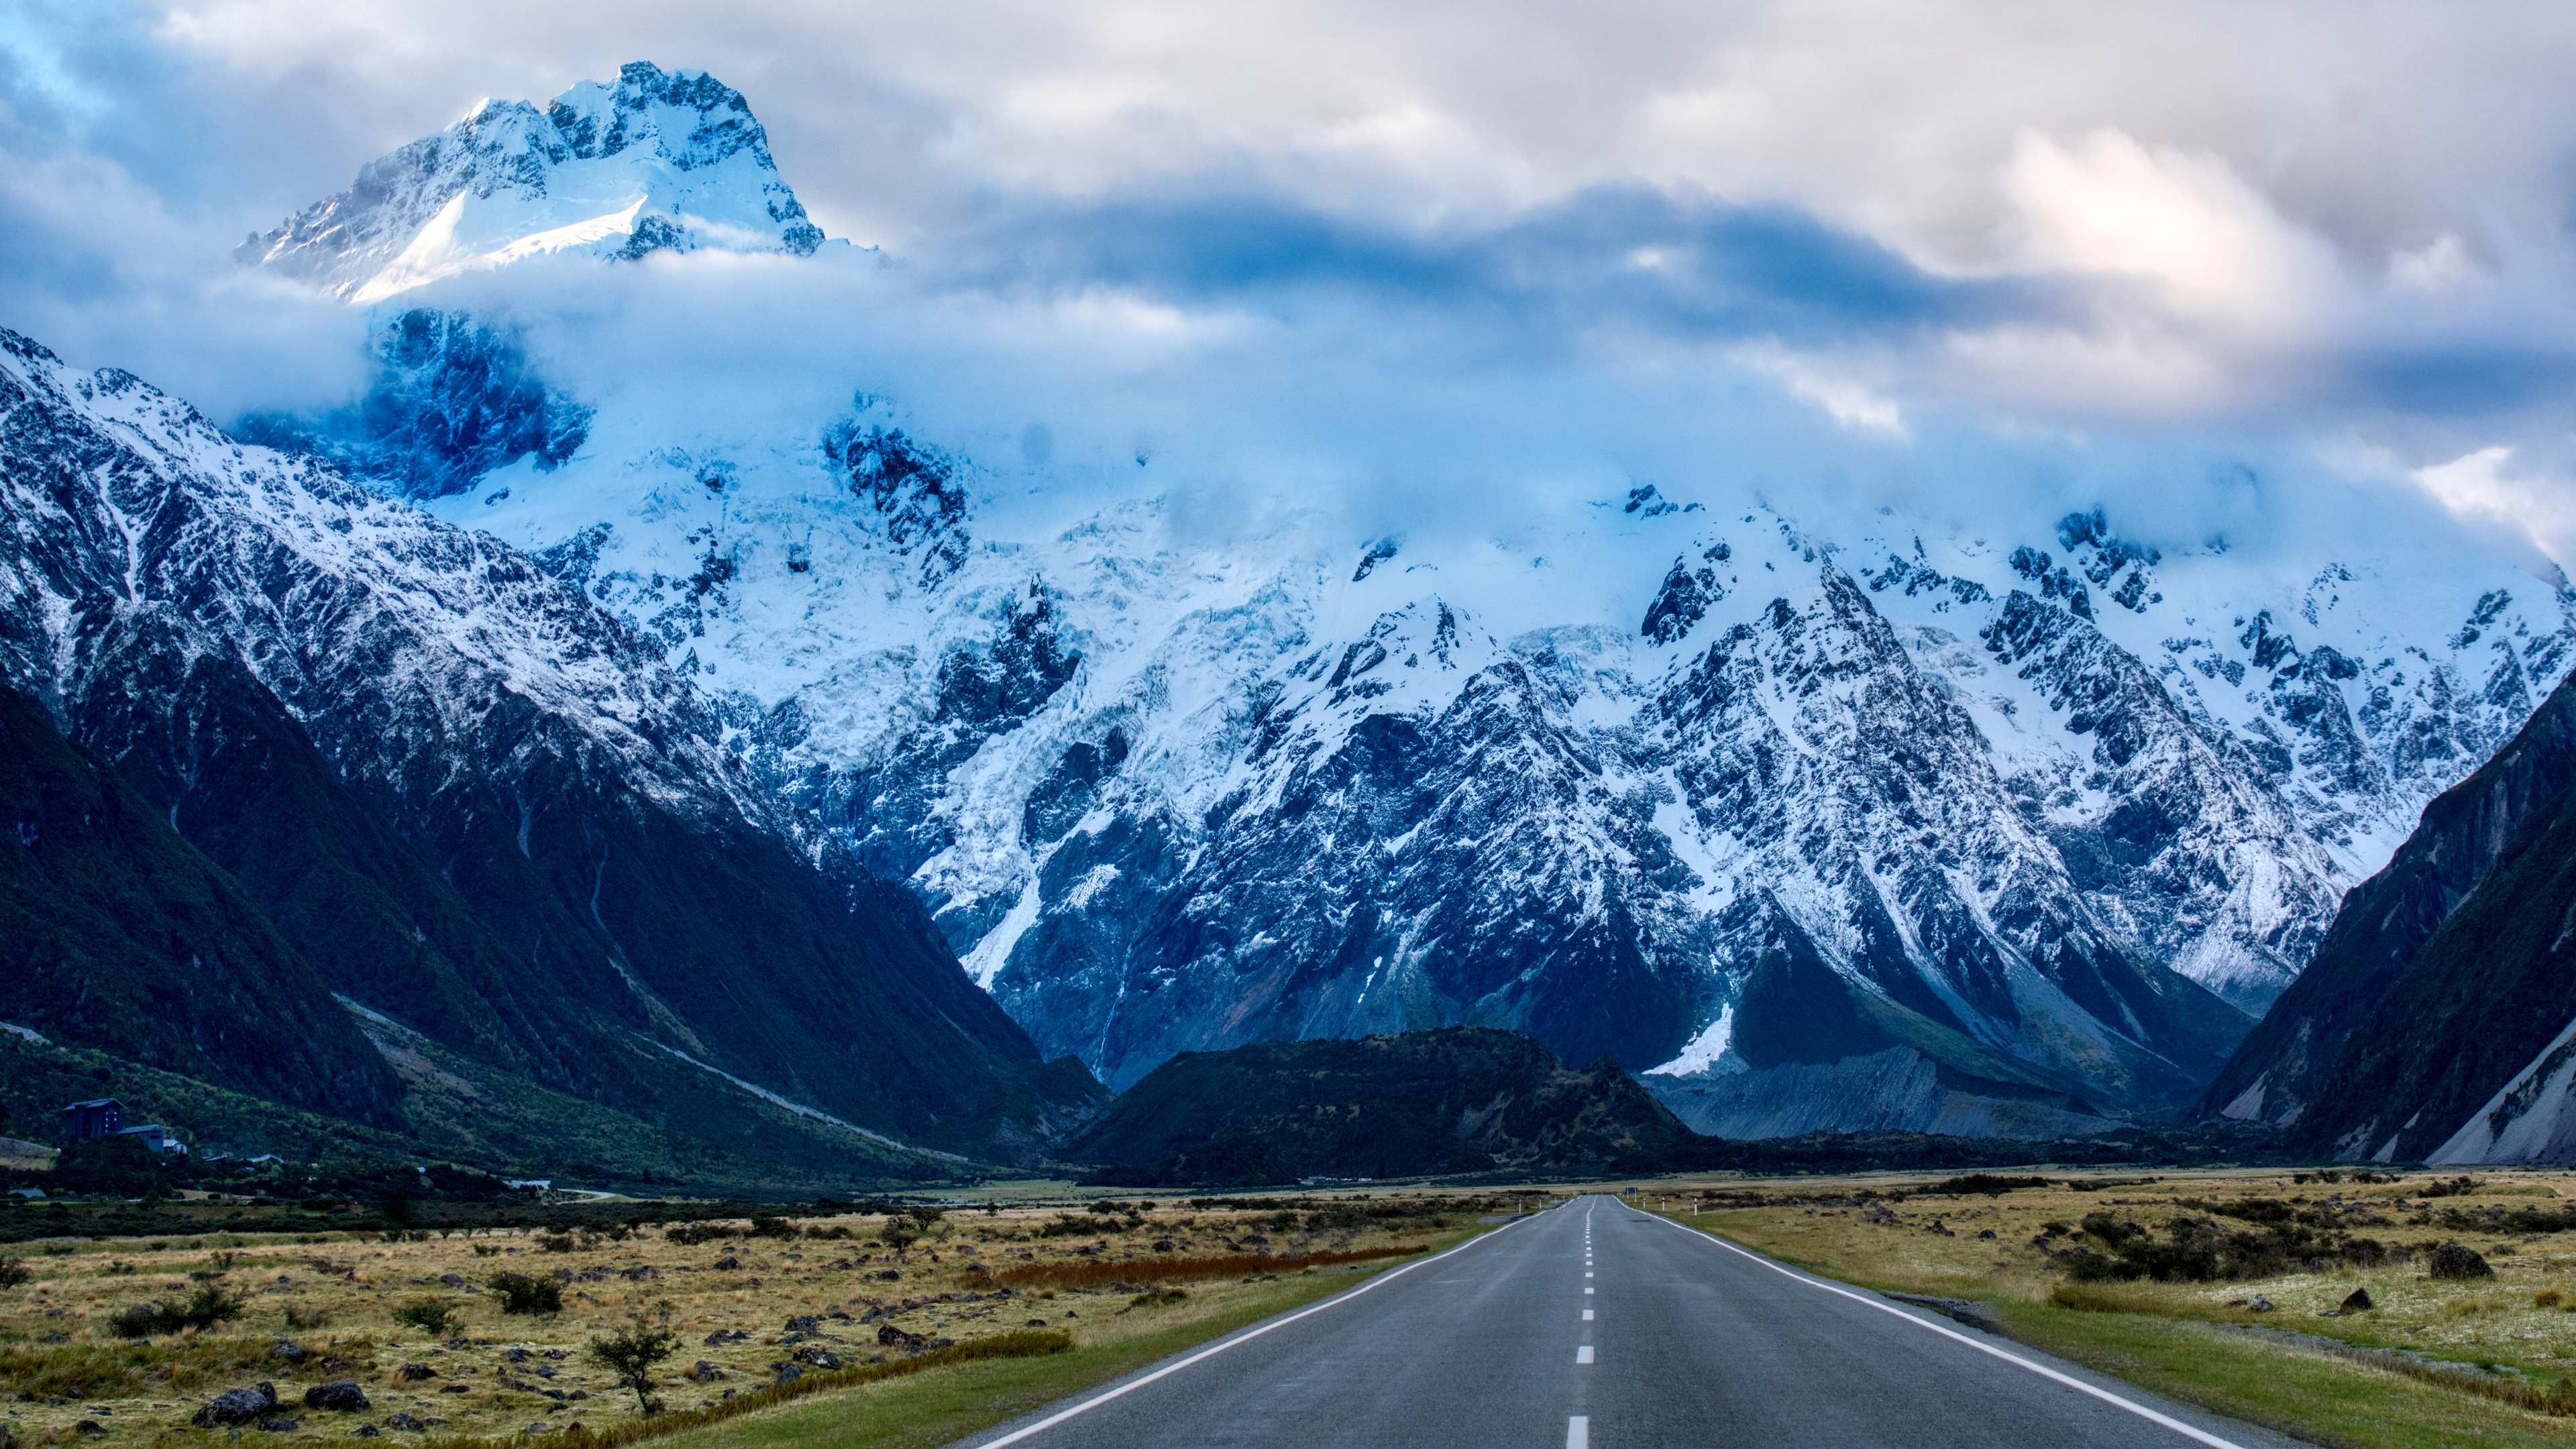 General 3840x2160 Trey Ratcliff photography mountains nature landscape road snow clouds New Zealand